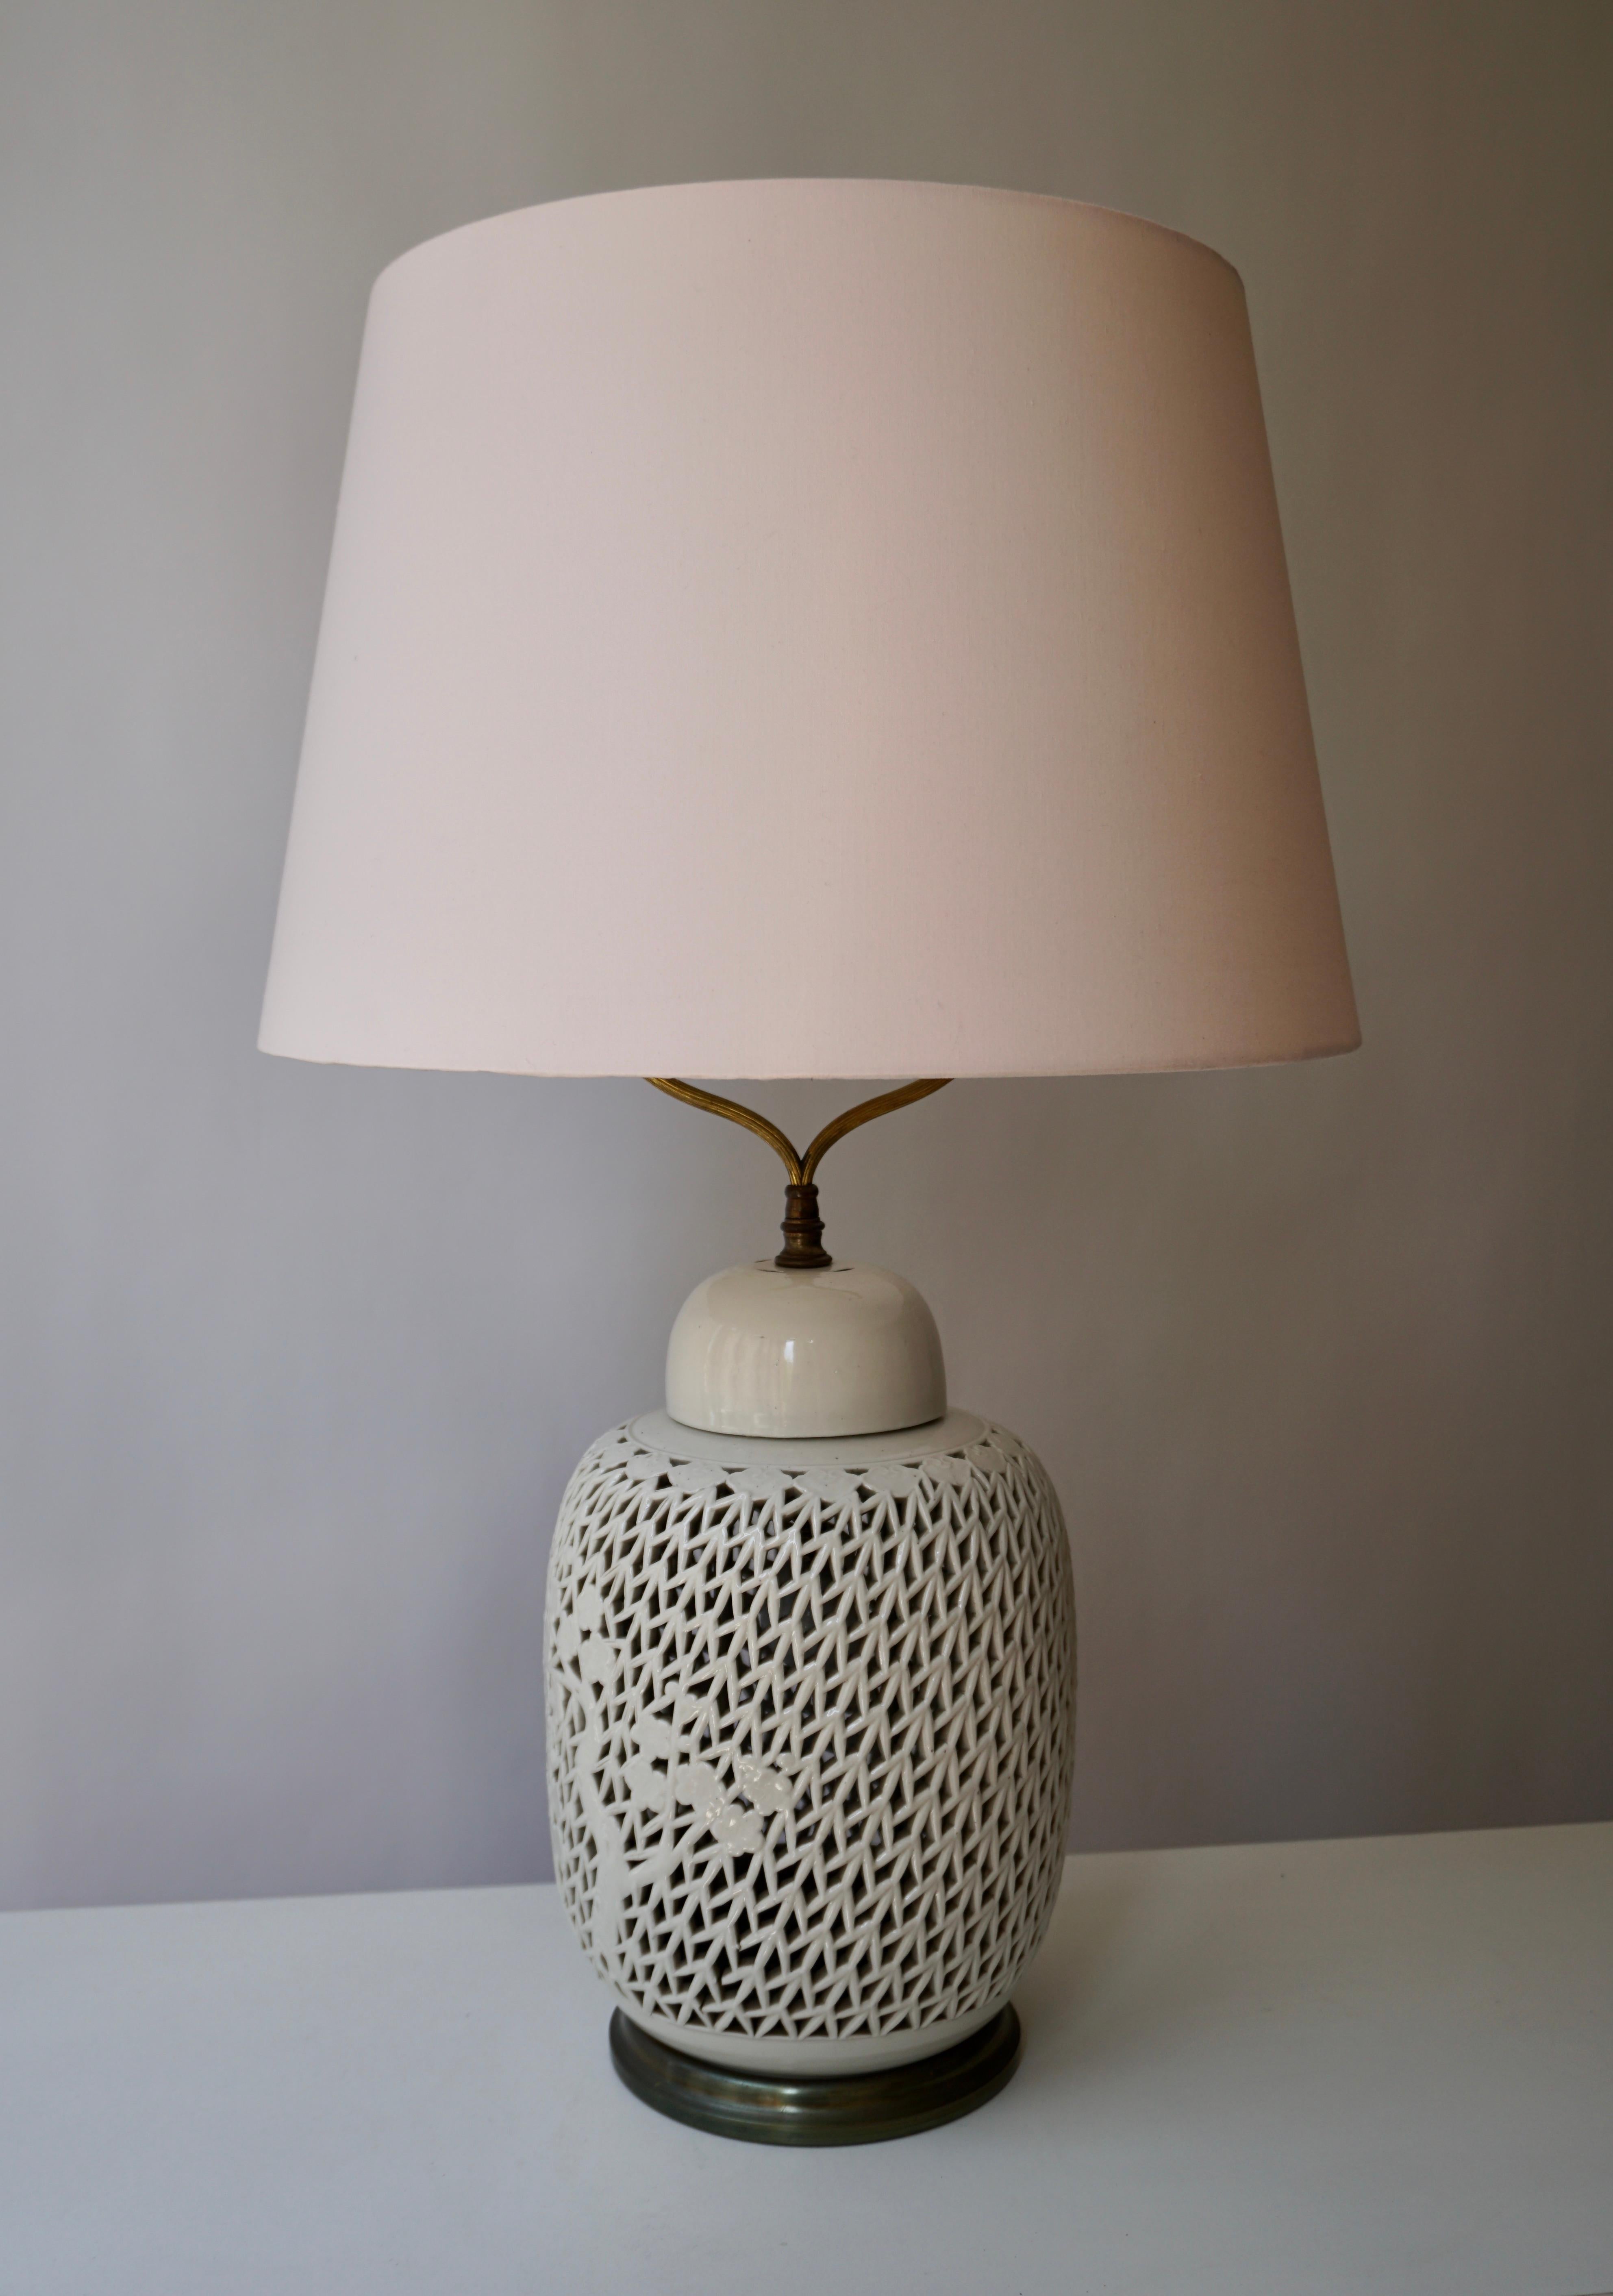 Unusually large scale reticulated Blanc De Chine porcelain table lamp. This example has an interior light allowing illumination from the upper bulb and or the interior light as illustrated in the pictures. The lamp is in very good, original and